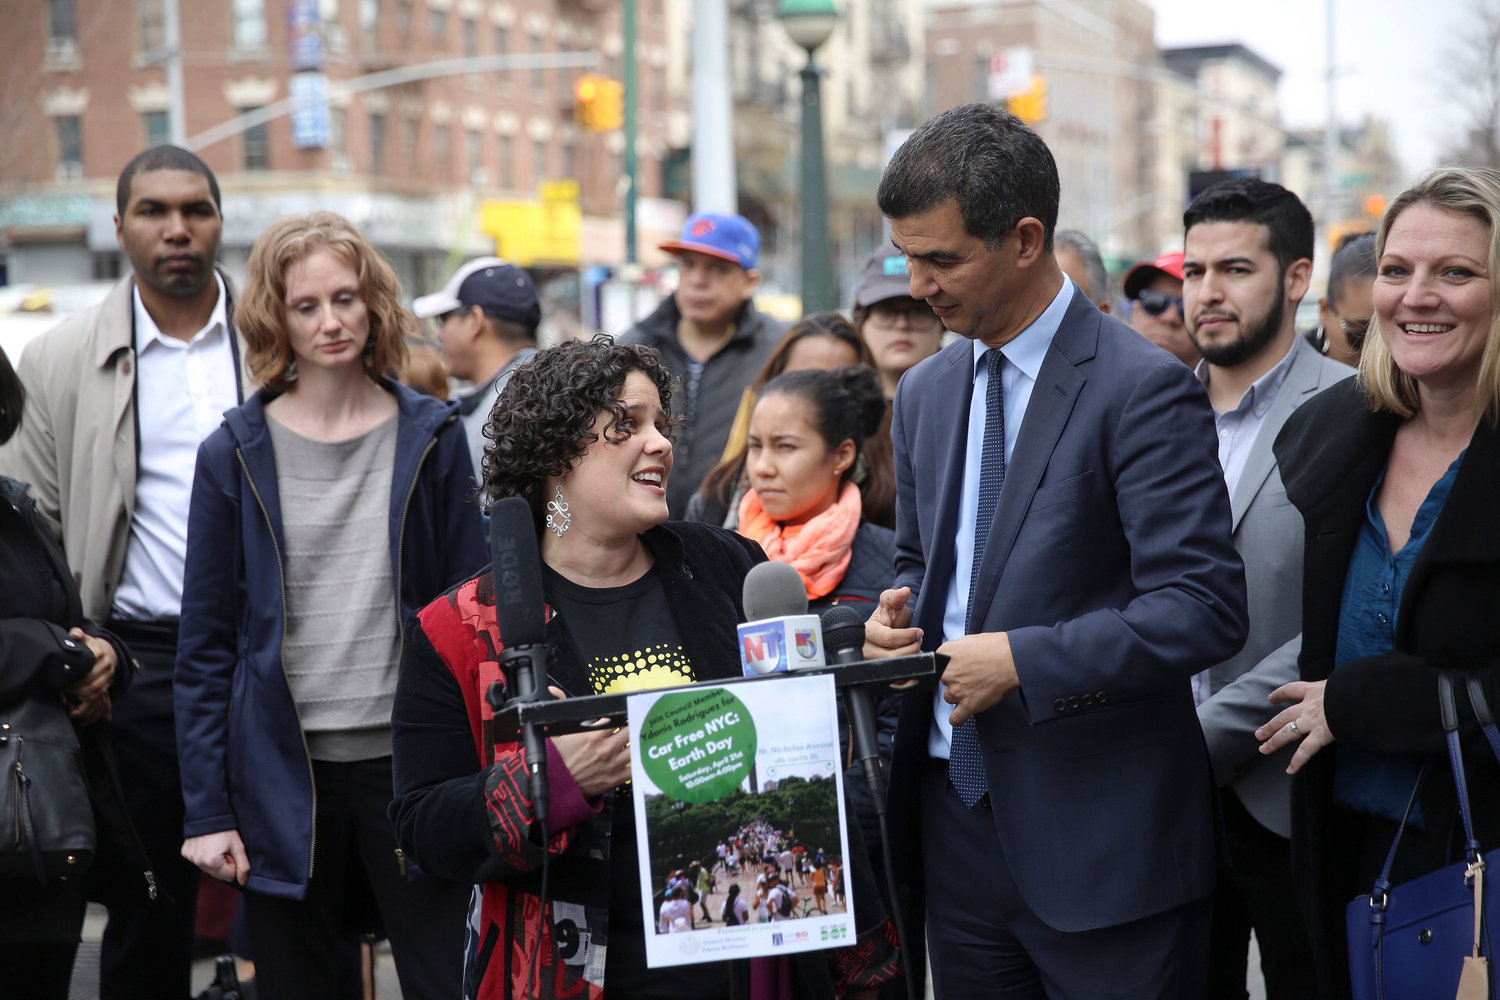 Councilman Ydanis Rodriguez championed Car-Free Earth Day as one of his pedestrian- and environmentally friendly programs he led as chair of the council’s transportation committee. Rodriguez leaves office after 12 years thanks to term limits.